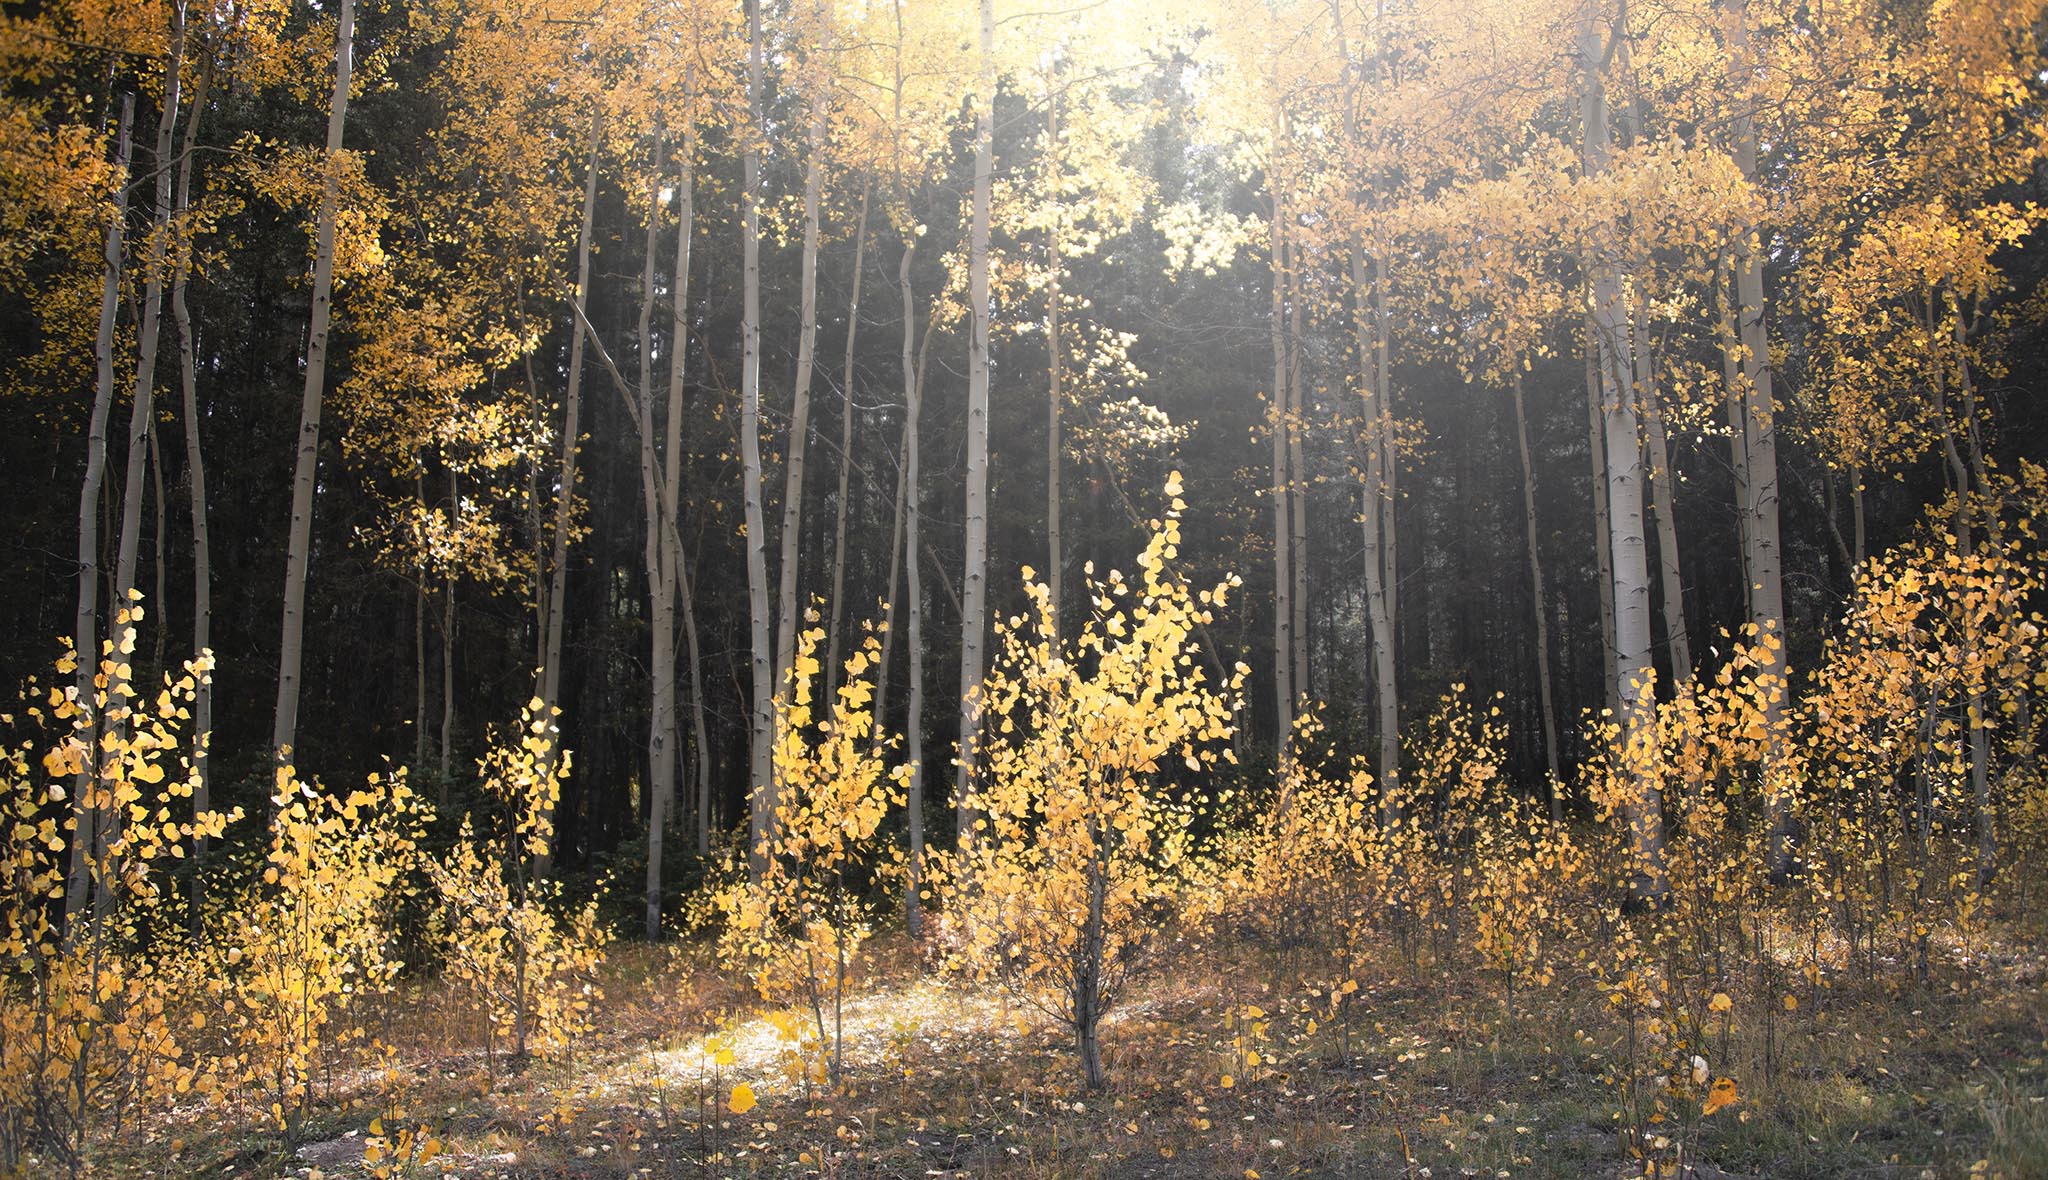 Small golden aspens picture